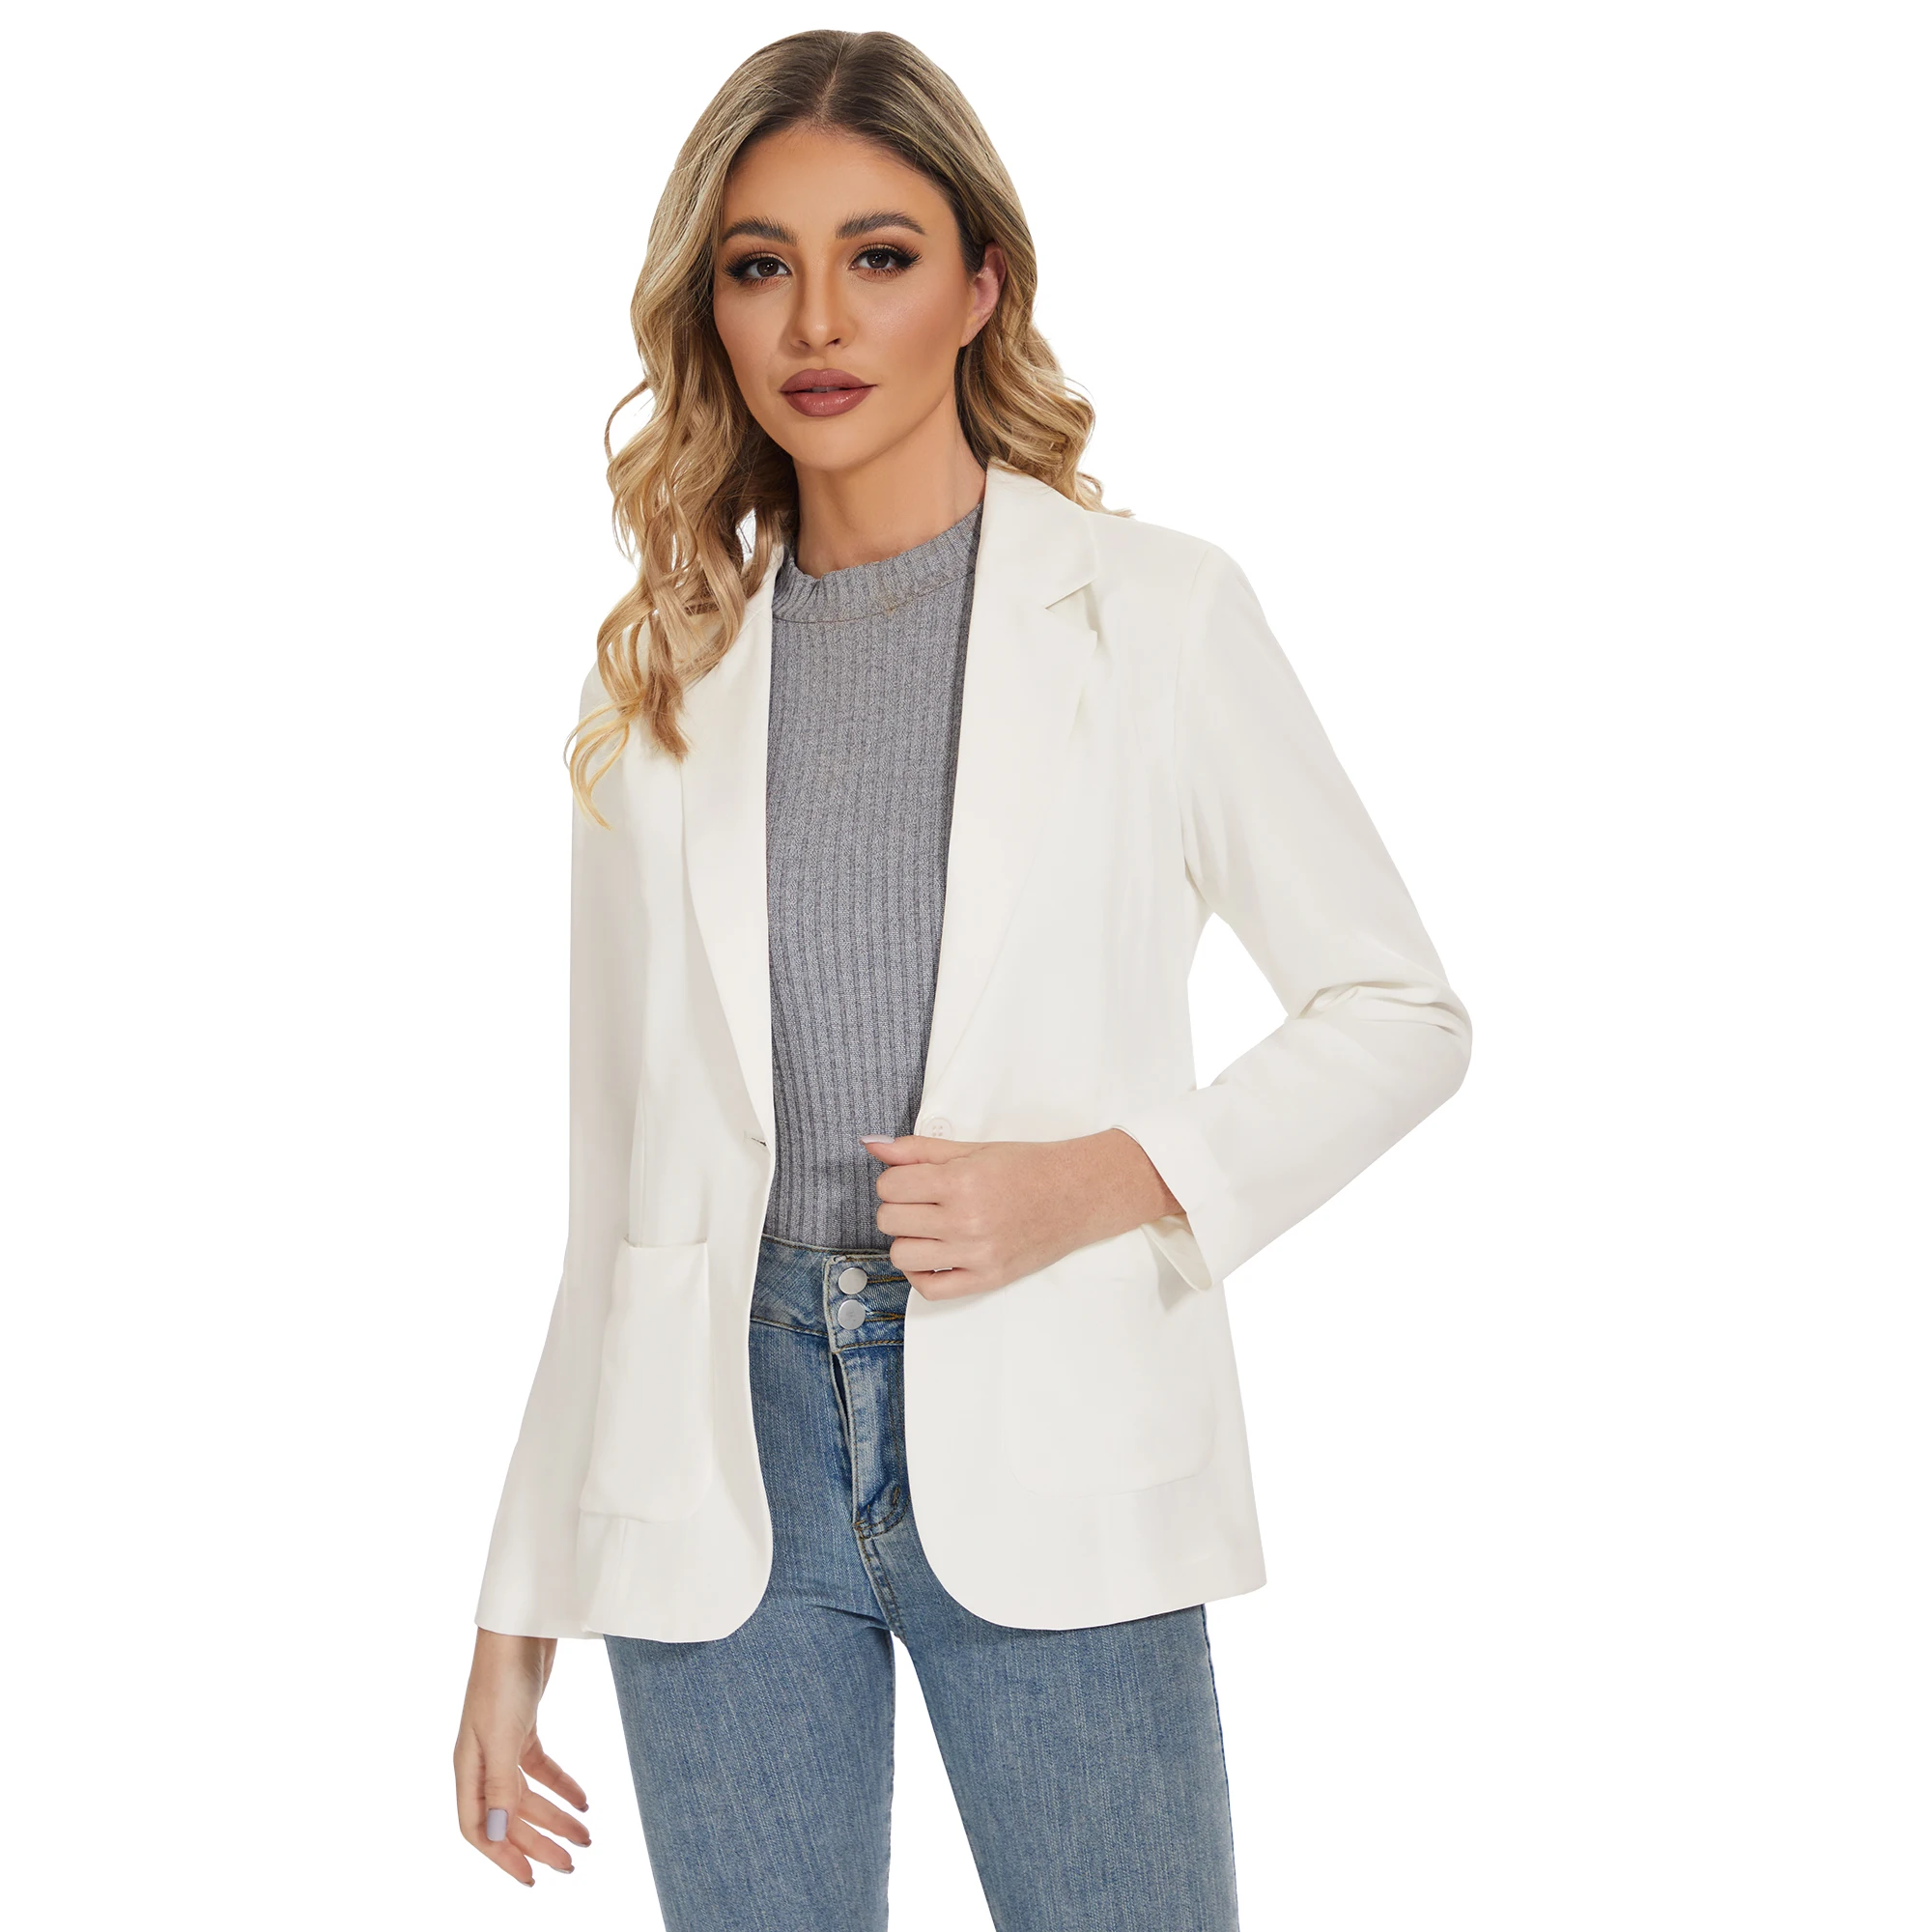 

SPRING SEAON Womens Casual Blazers Long Sleeve Work Office Jackets Open Front Notch Lapel Collar Blazers Jacket with Pockets